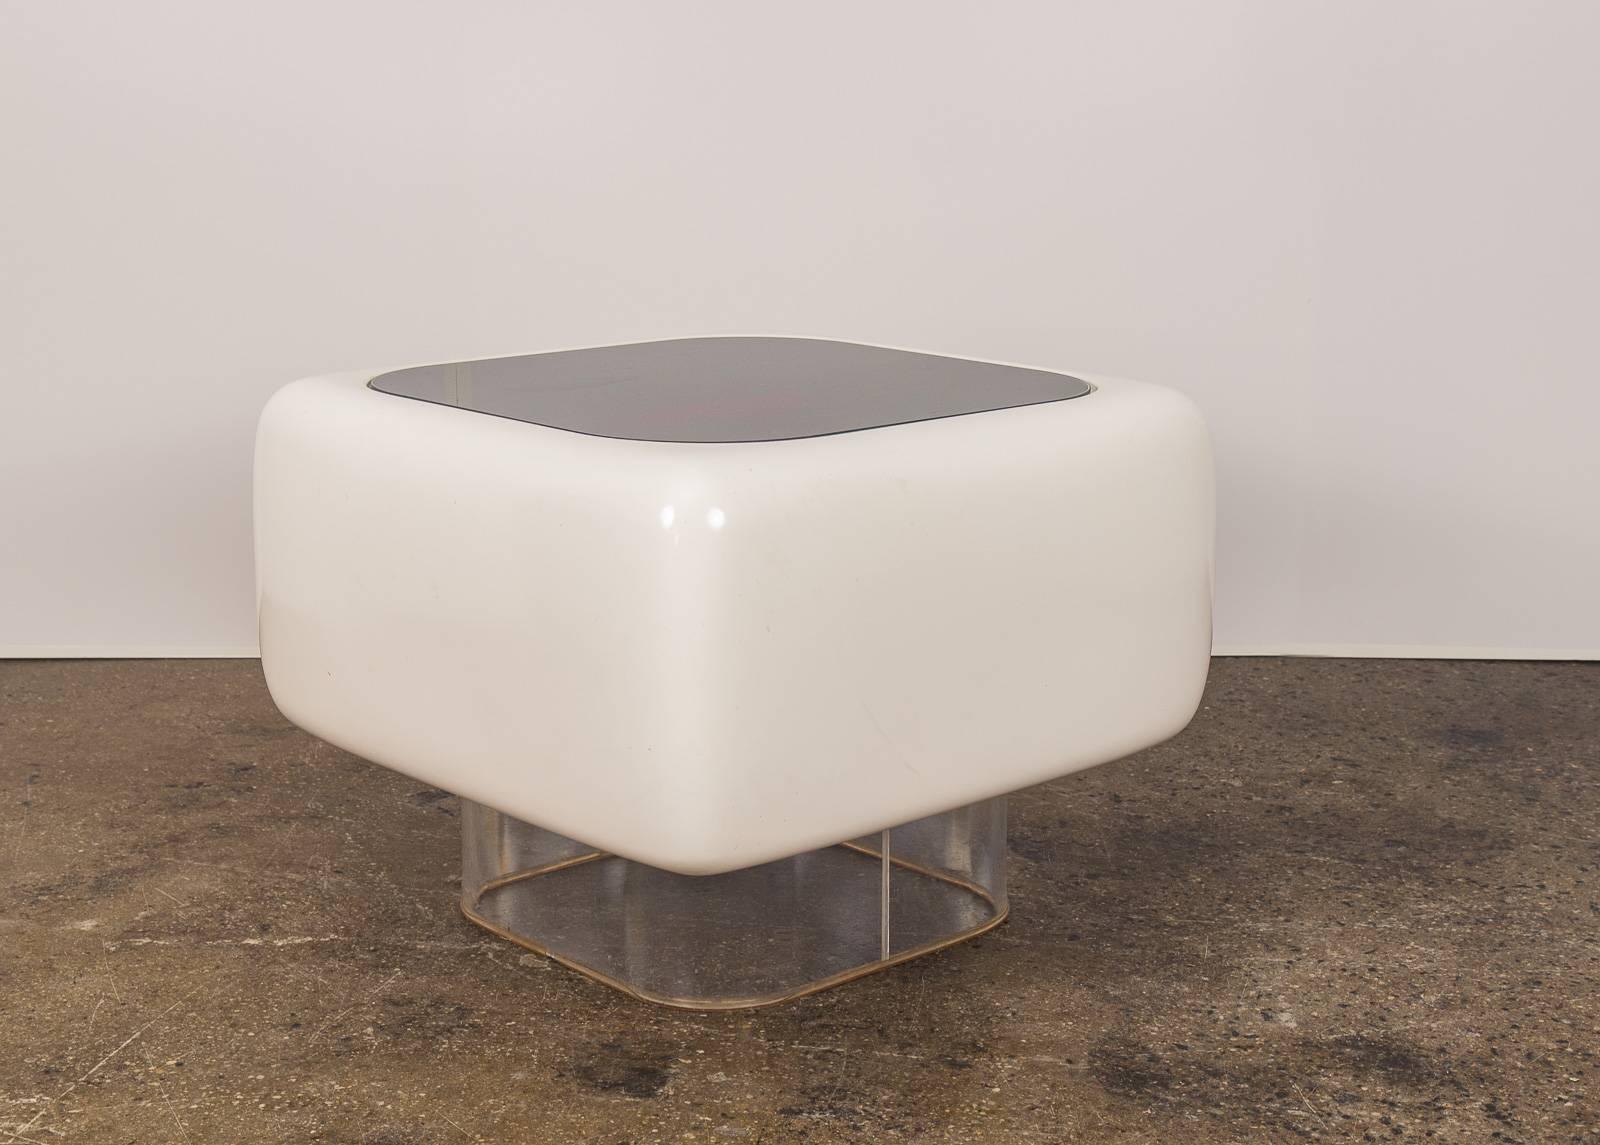 1970s Space Age fiberglass table on clear acrylic base attributed to Warren Platner. This groovy yet hefty white table has seen minimal wear and is in fantastic vintage condition. As photographs show, there are no cracks in the clear acrylic base